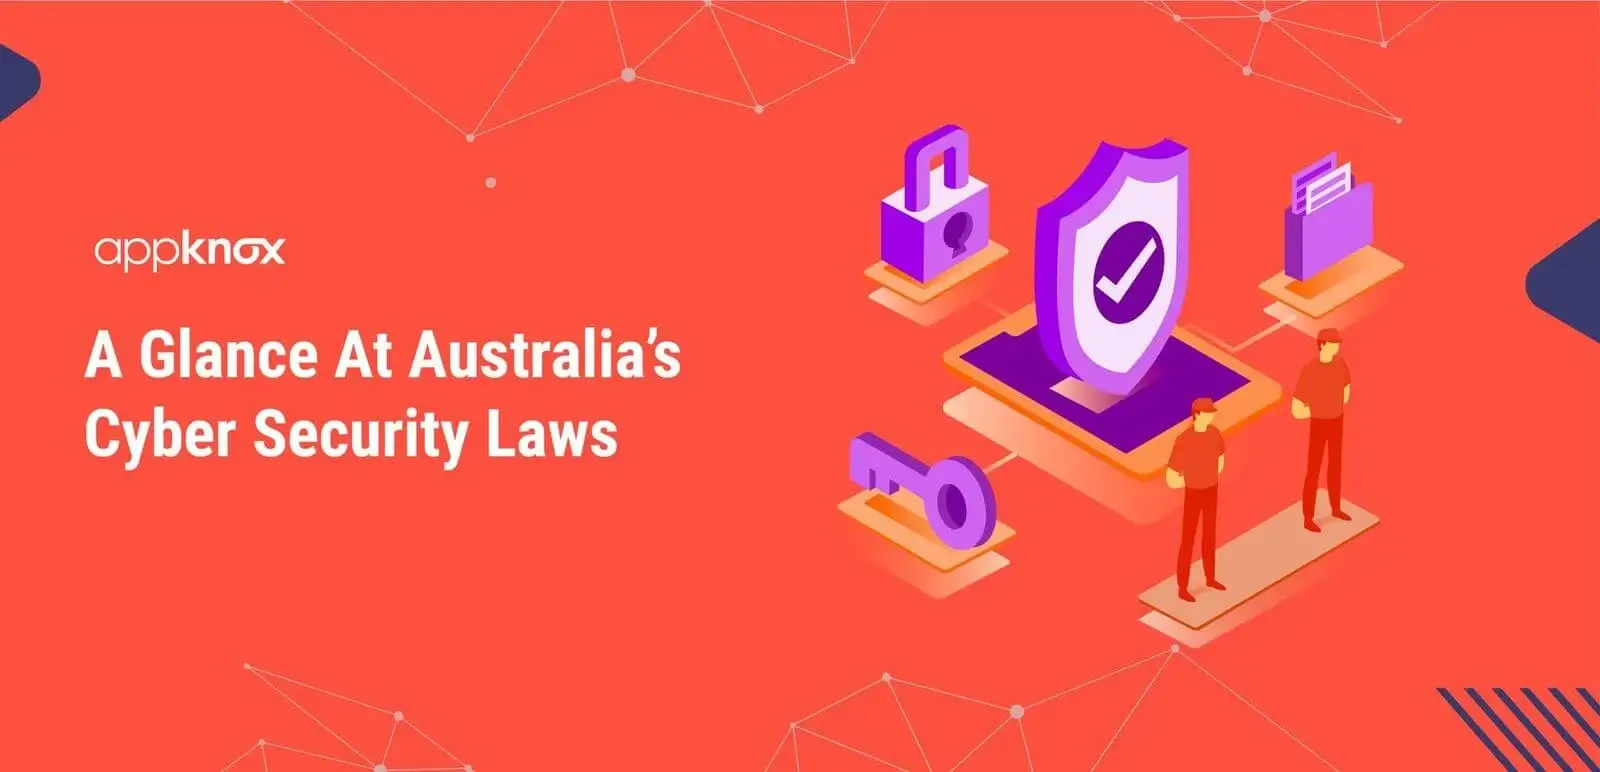 A Glance At Australia’s Cyber Security Laws